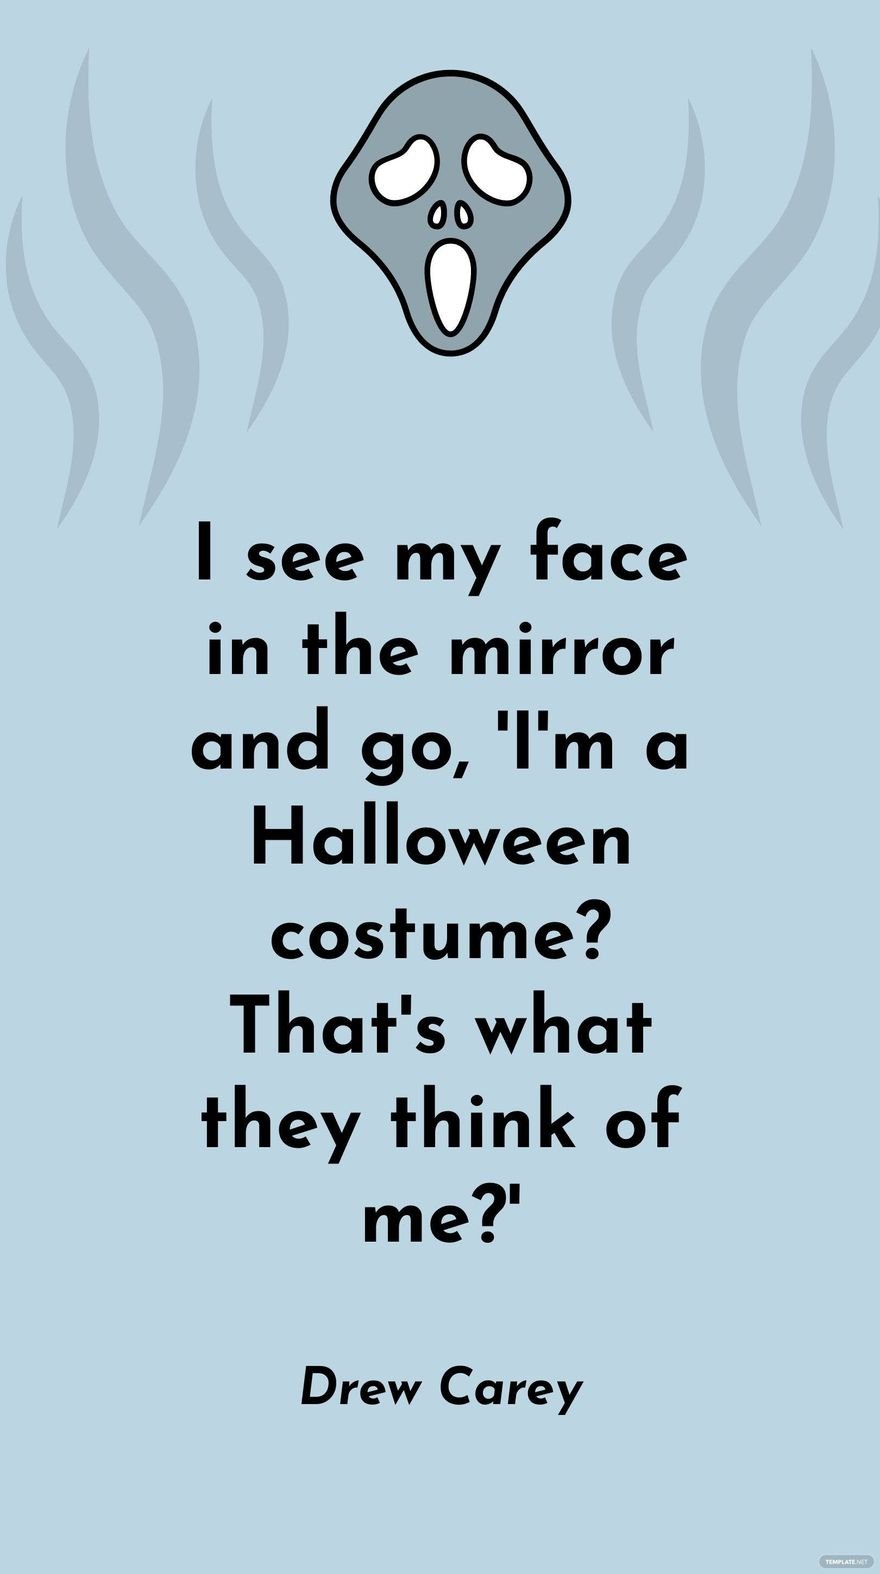 Drew Carey - I see my face in the mirror and go, 'I'm a Halloween costume? That's what they think of me?' in JPG